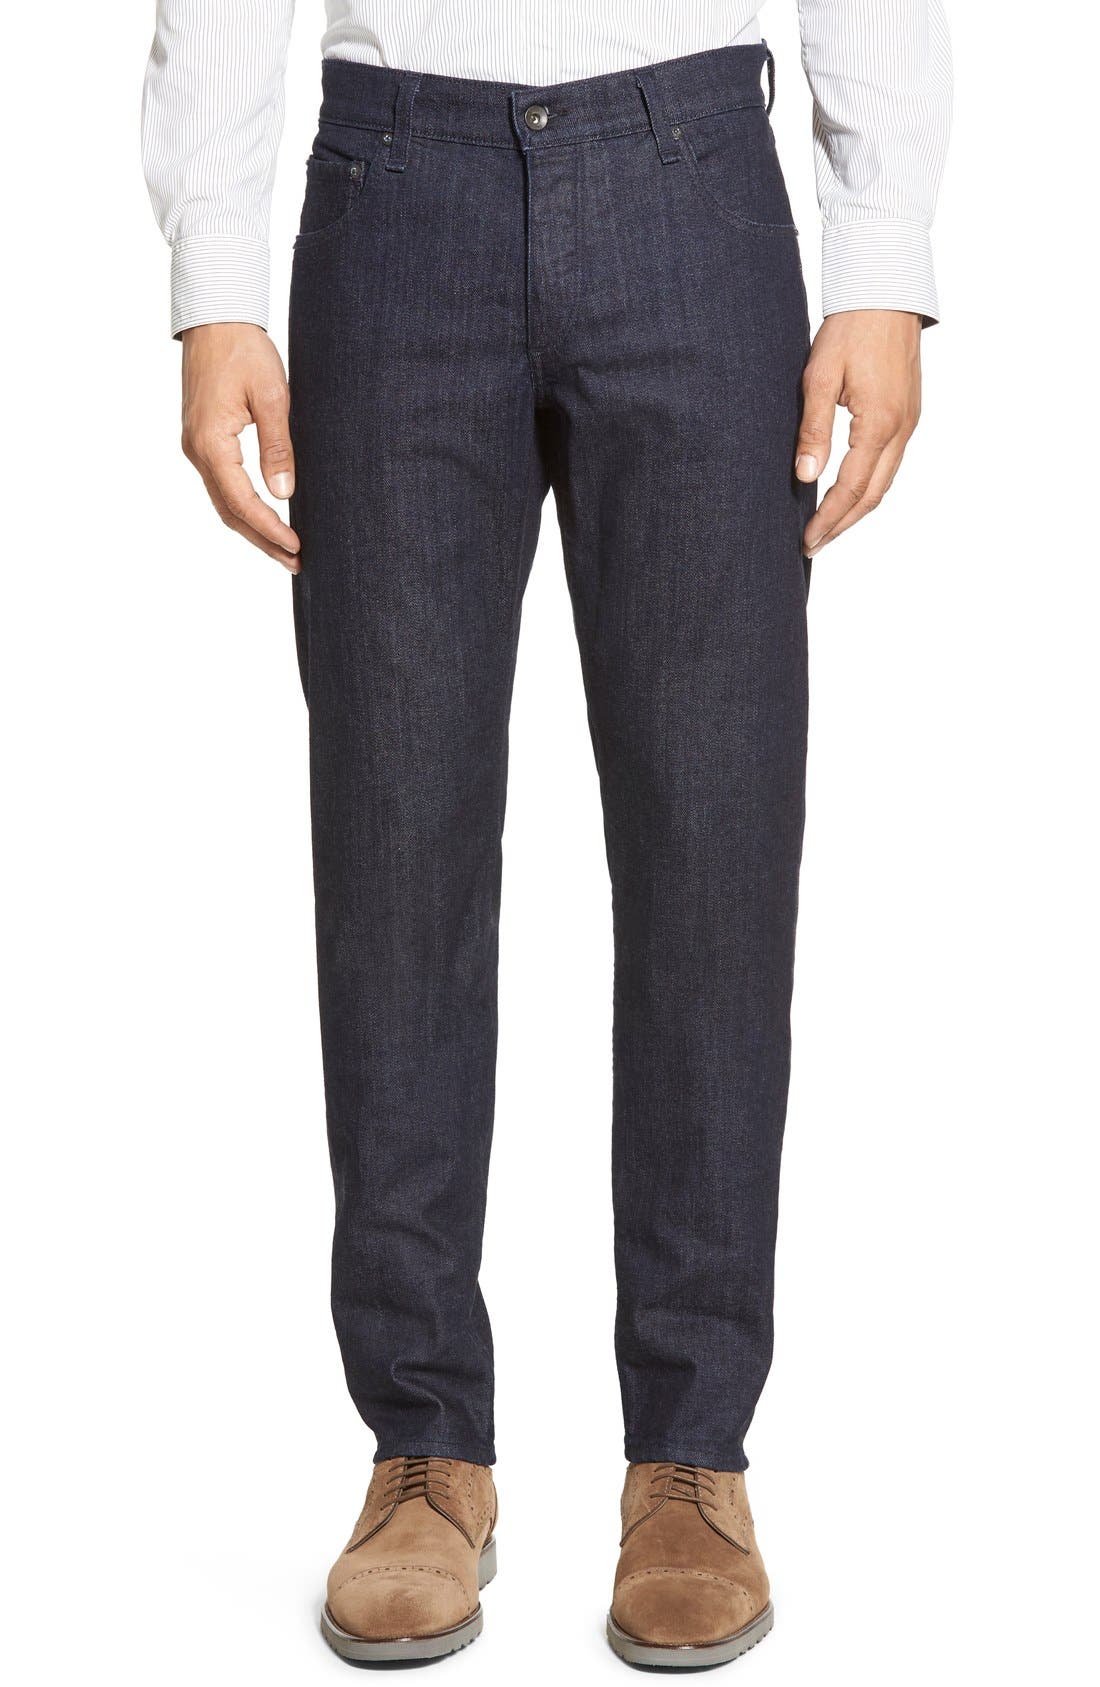 rag and bone men's standard issue jeans